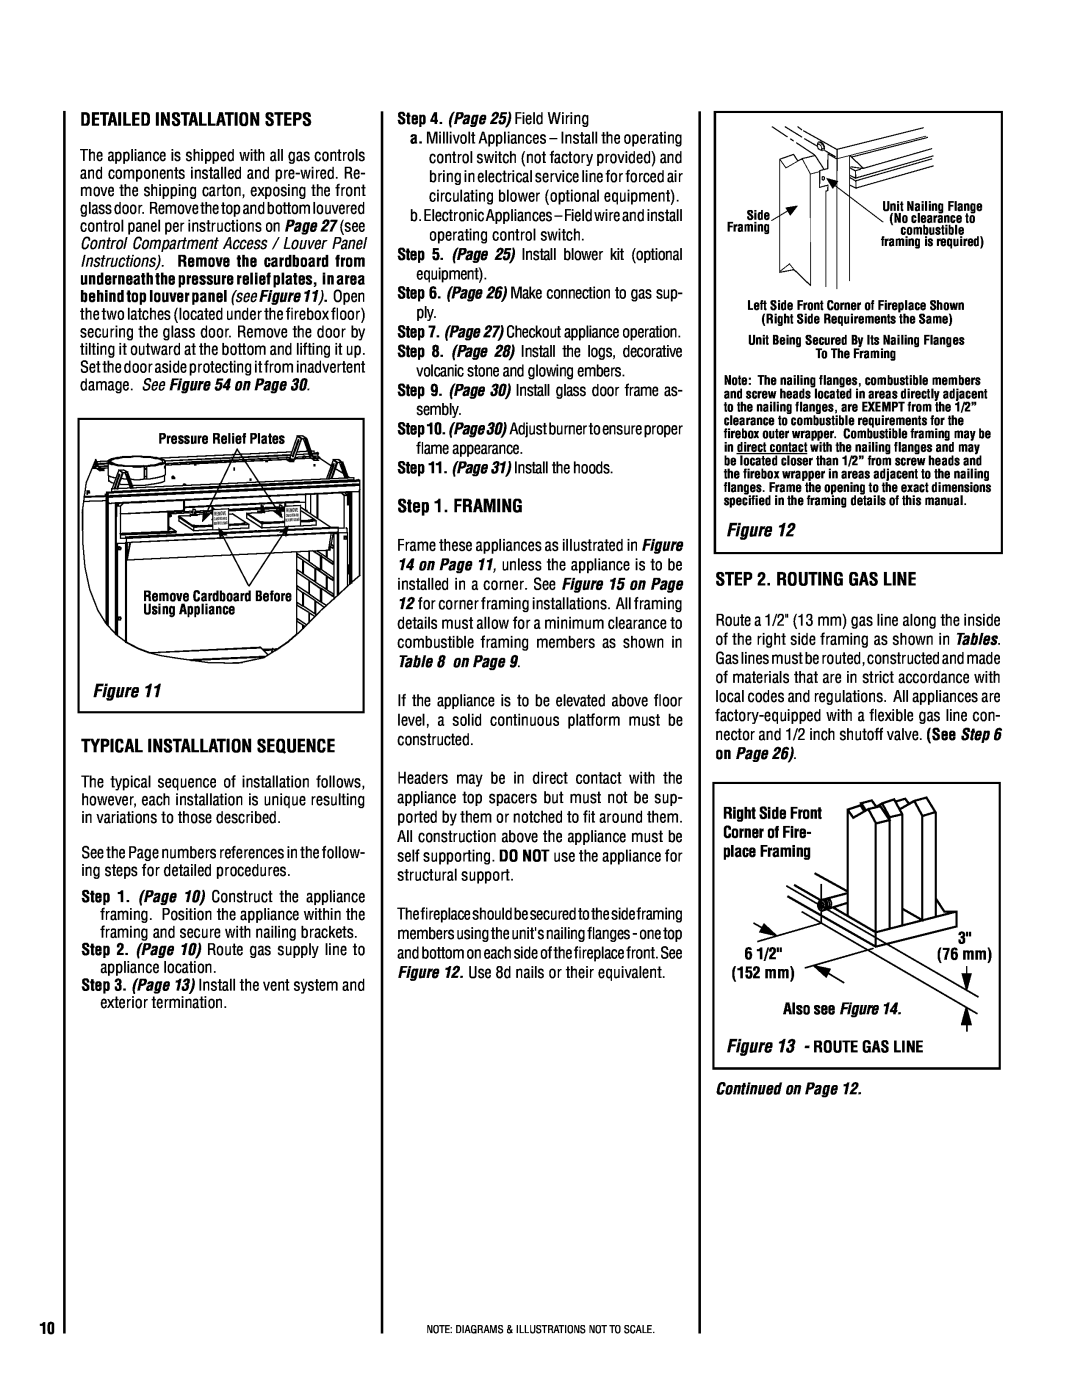 TOA Electronics SSDV-3328 Detailed Installation Steps, Typical Installation Sequence, Framing, Routing Gas Line 